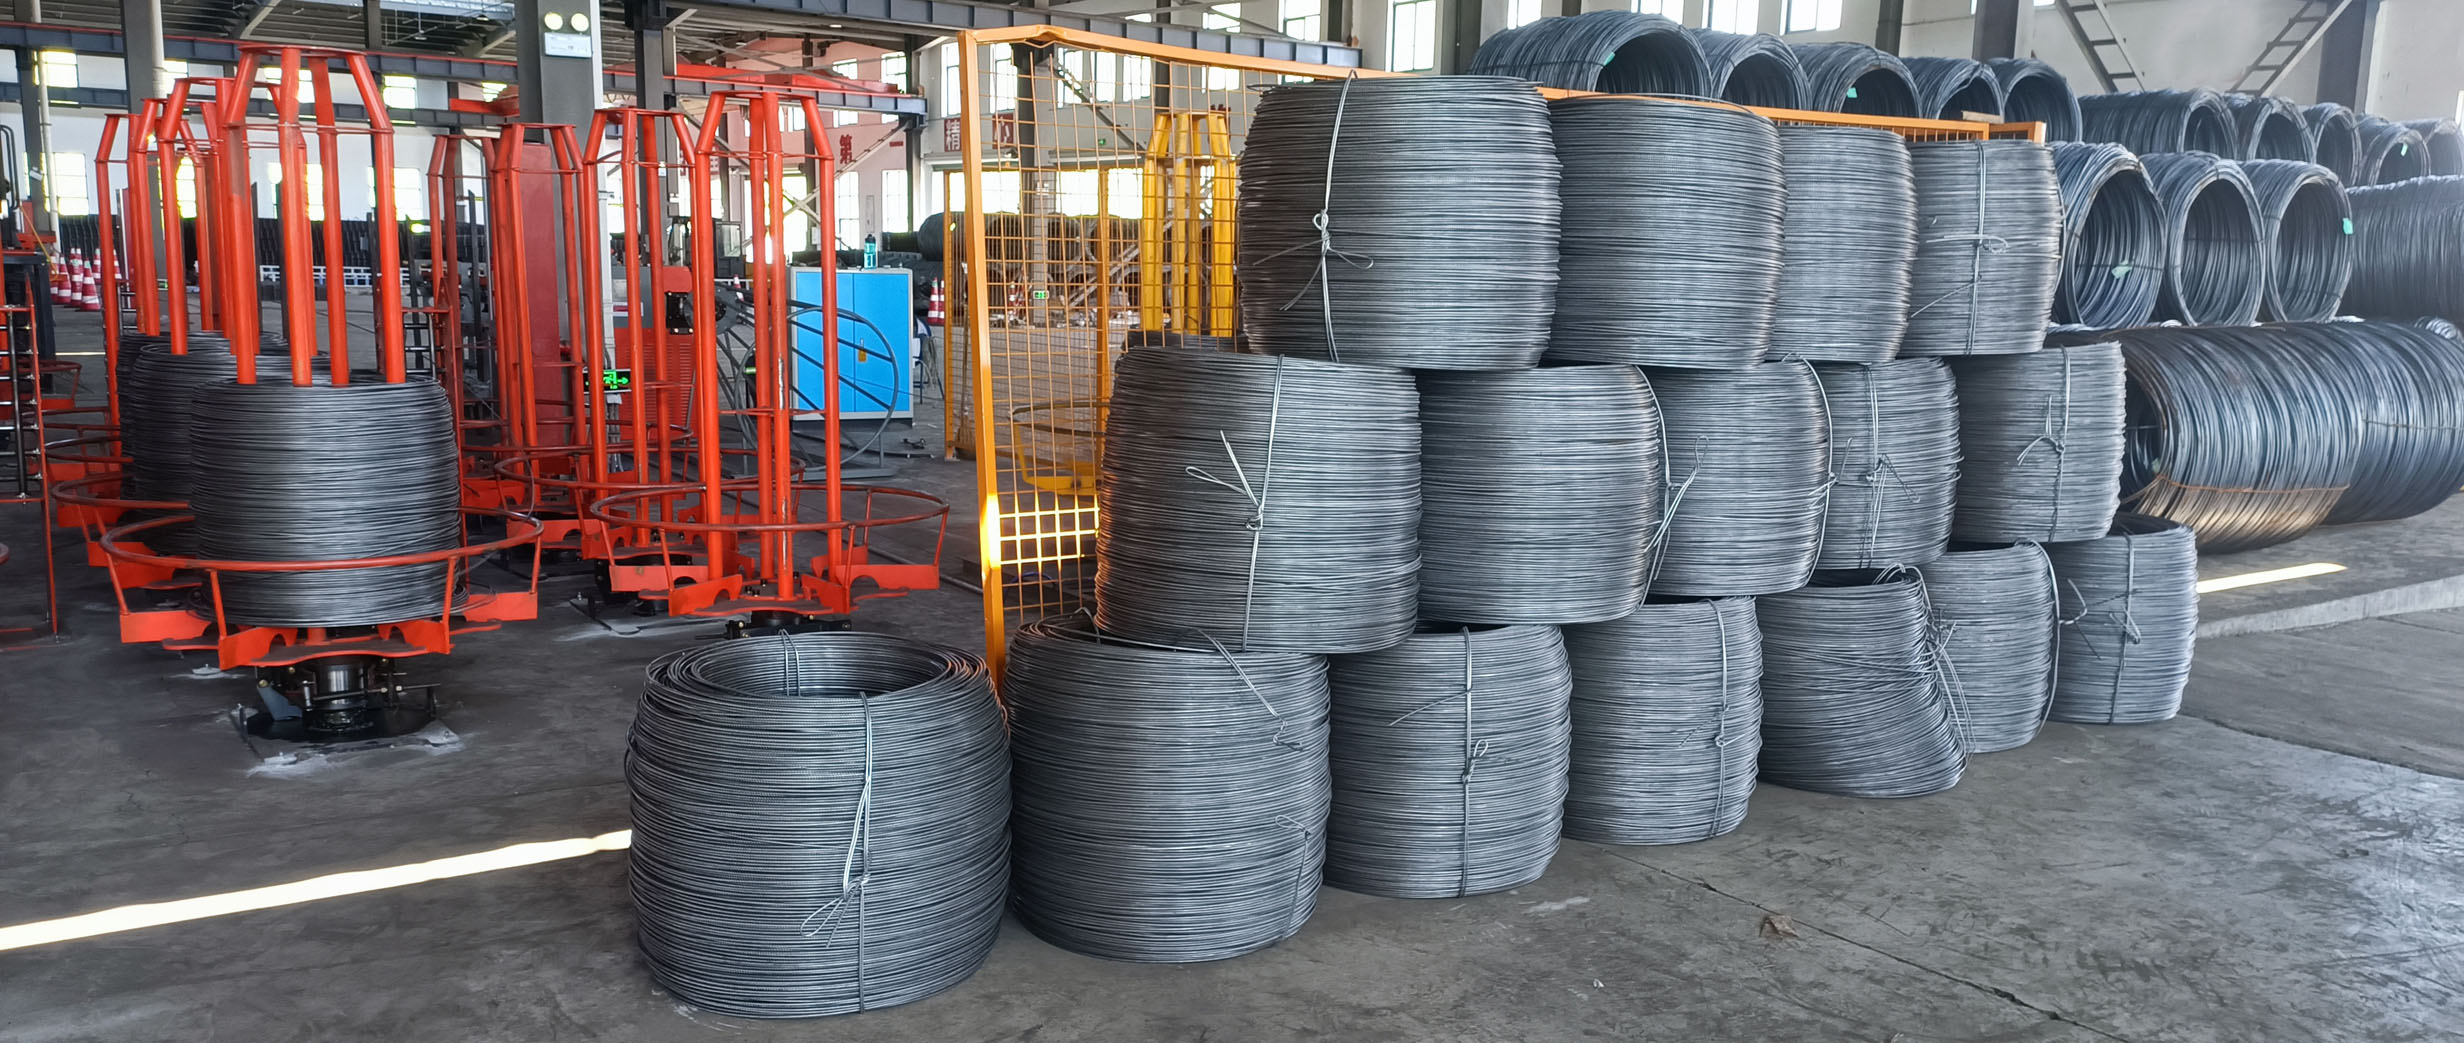 Cold-rolled ribbed wire1 pv 2000X1000